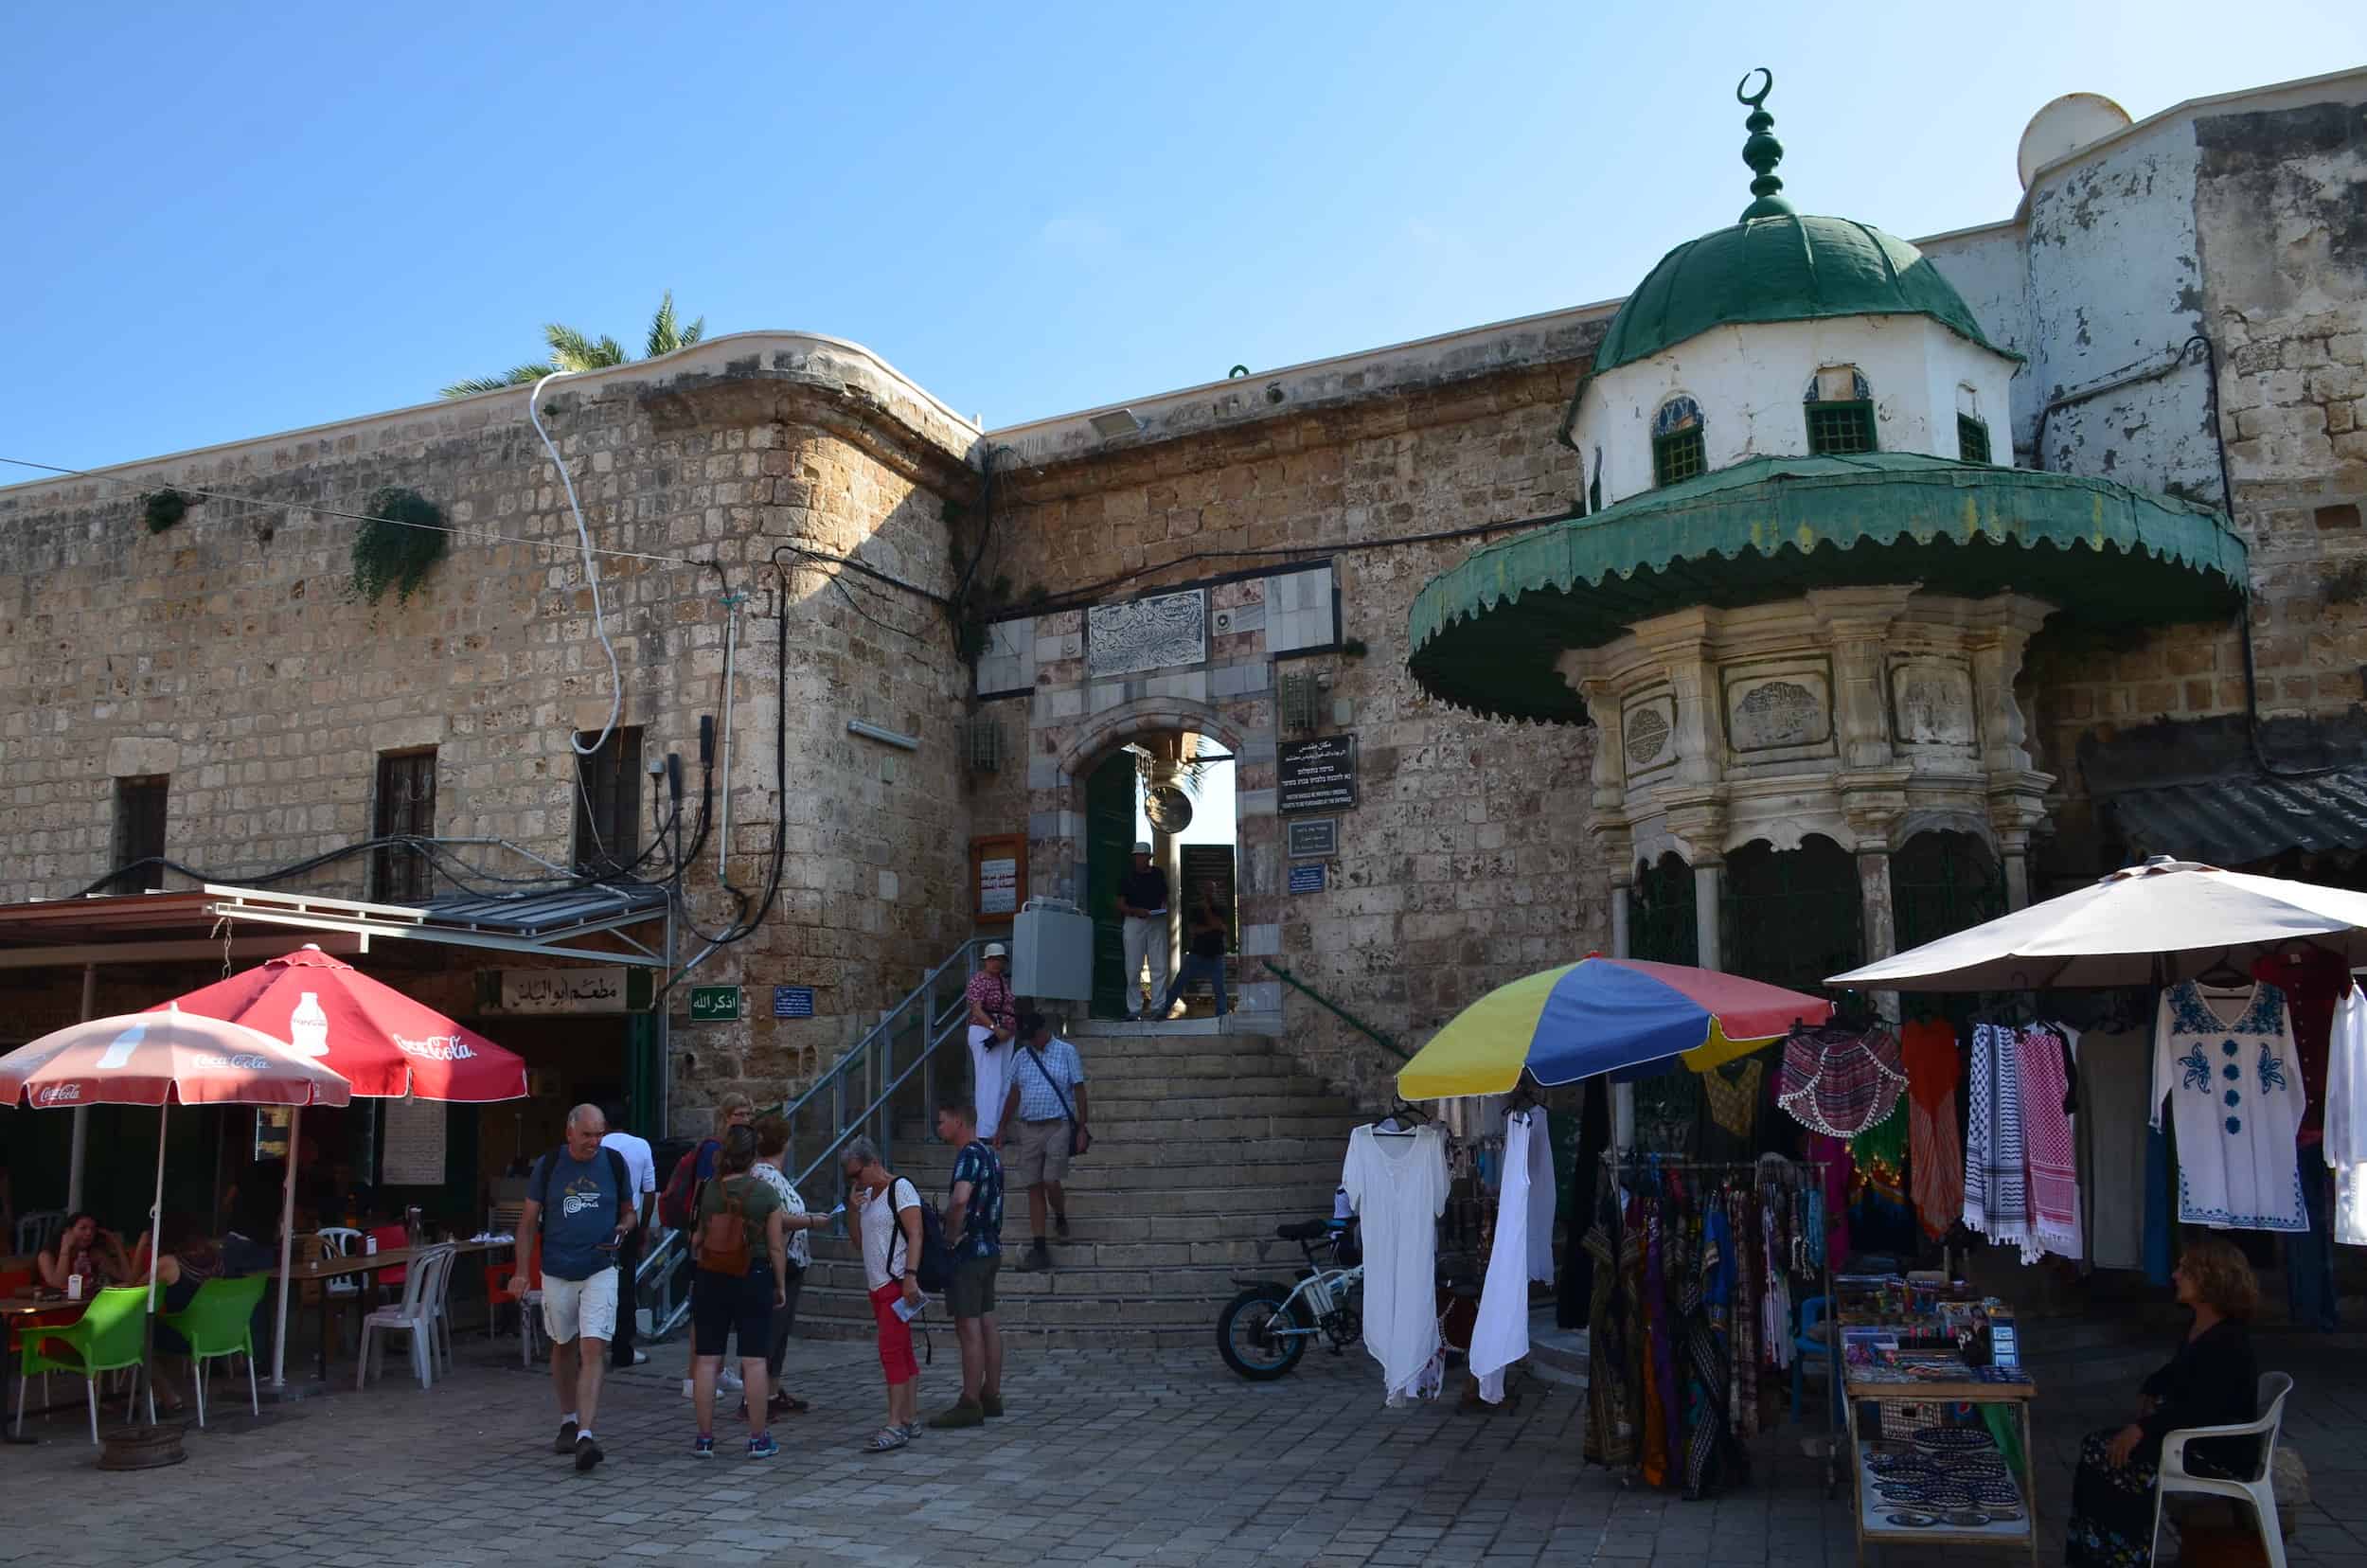 Entrance to the al-Jazzar Mosque complex in Acre, Israel